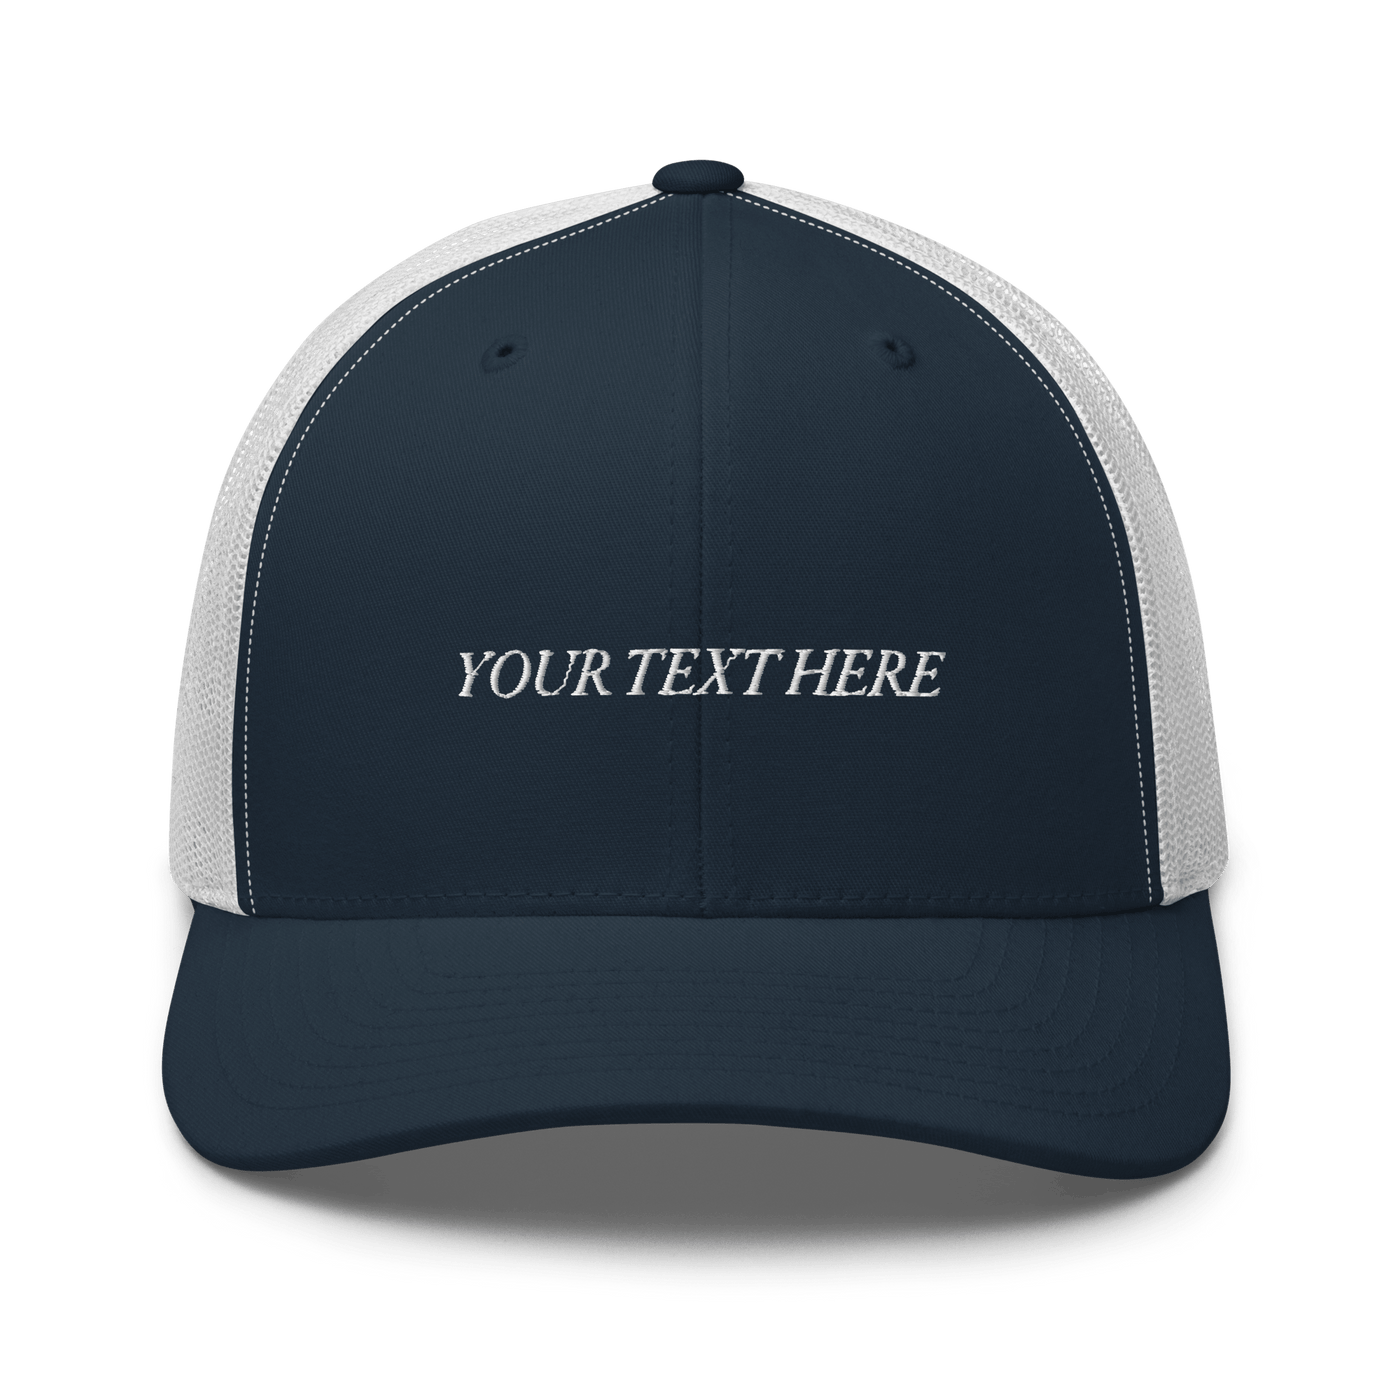 Customize Your Own Trucker Cap - Italic Font - Navy/ White - - Just Another Cap Store